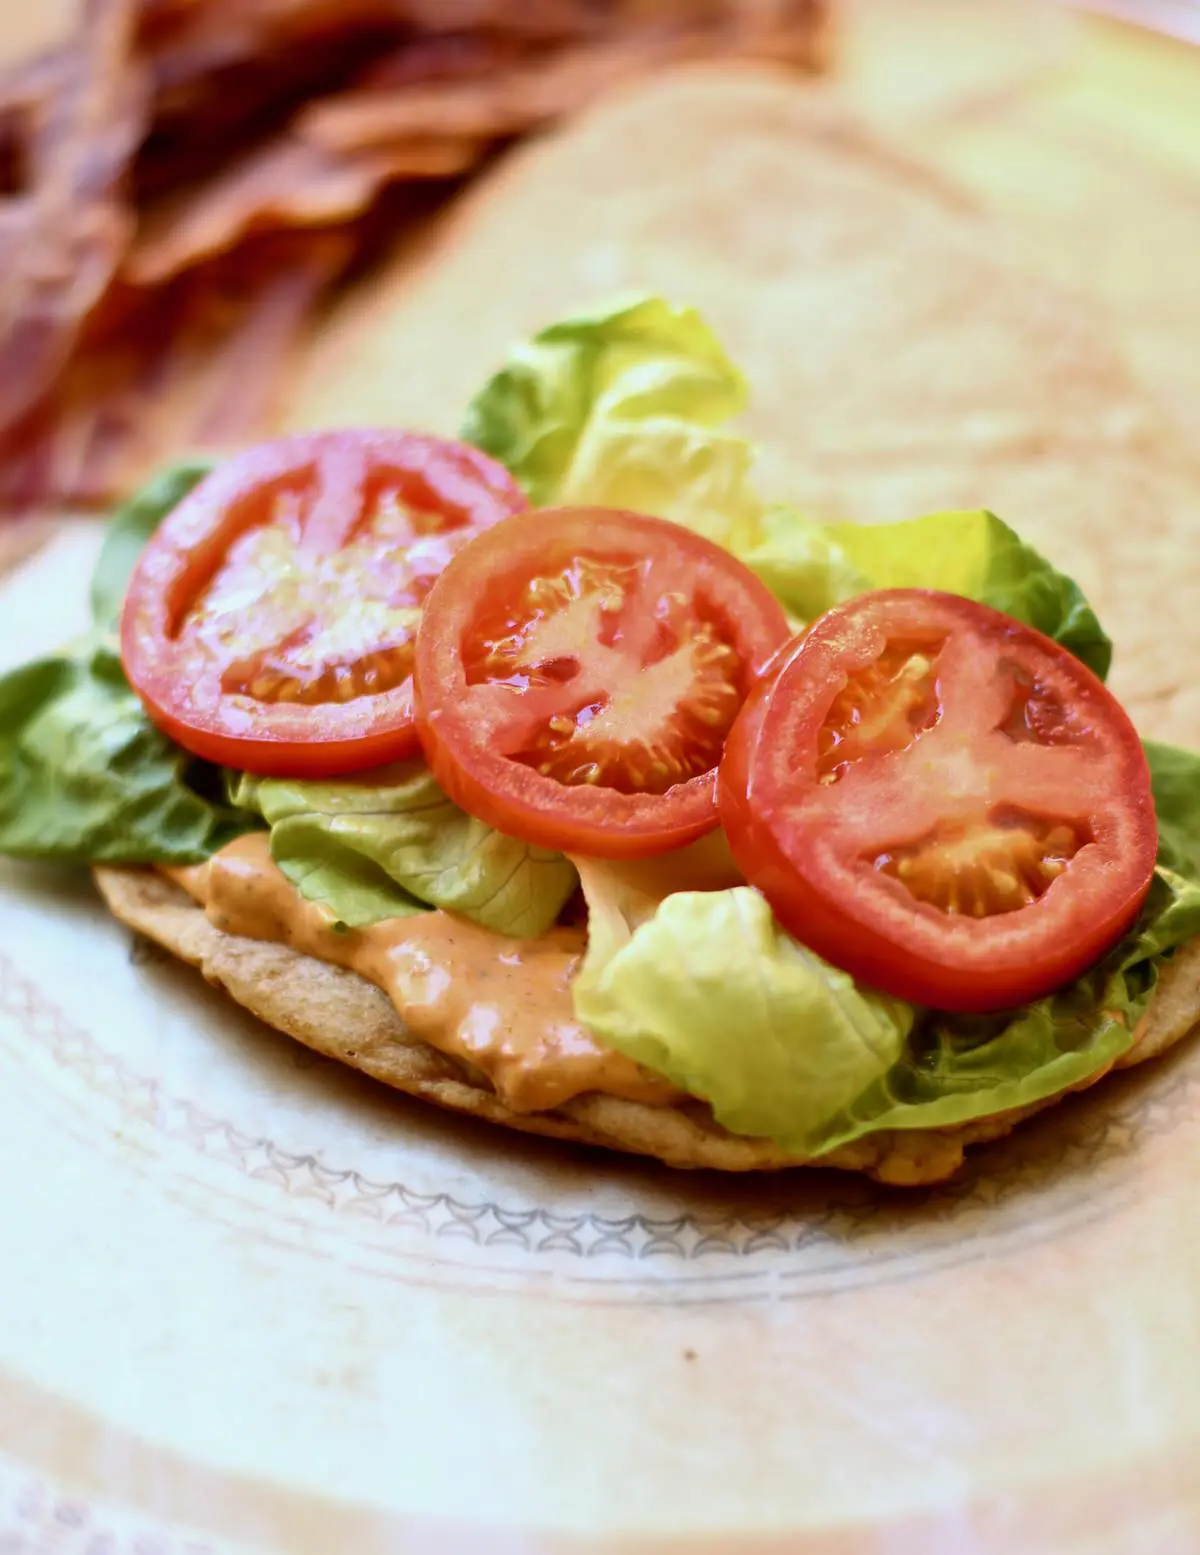 an open face sandwich with tomatoes